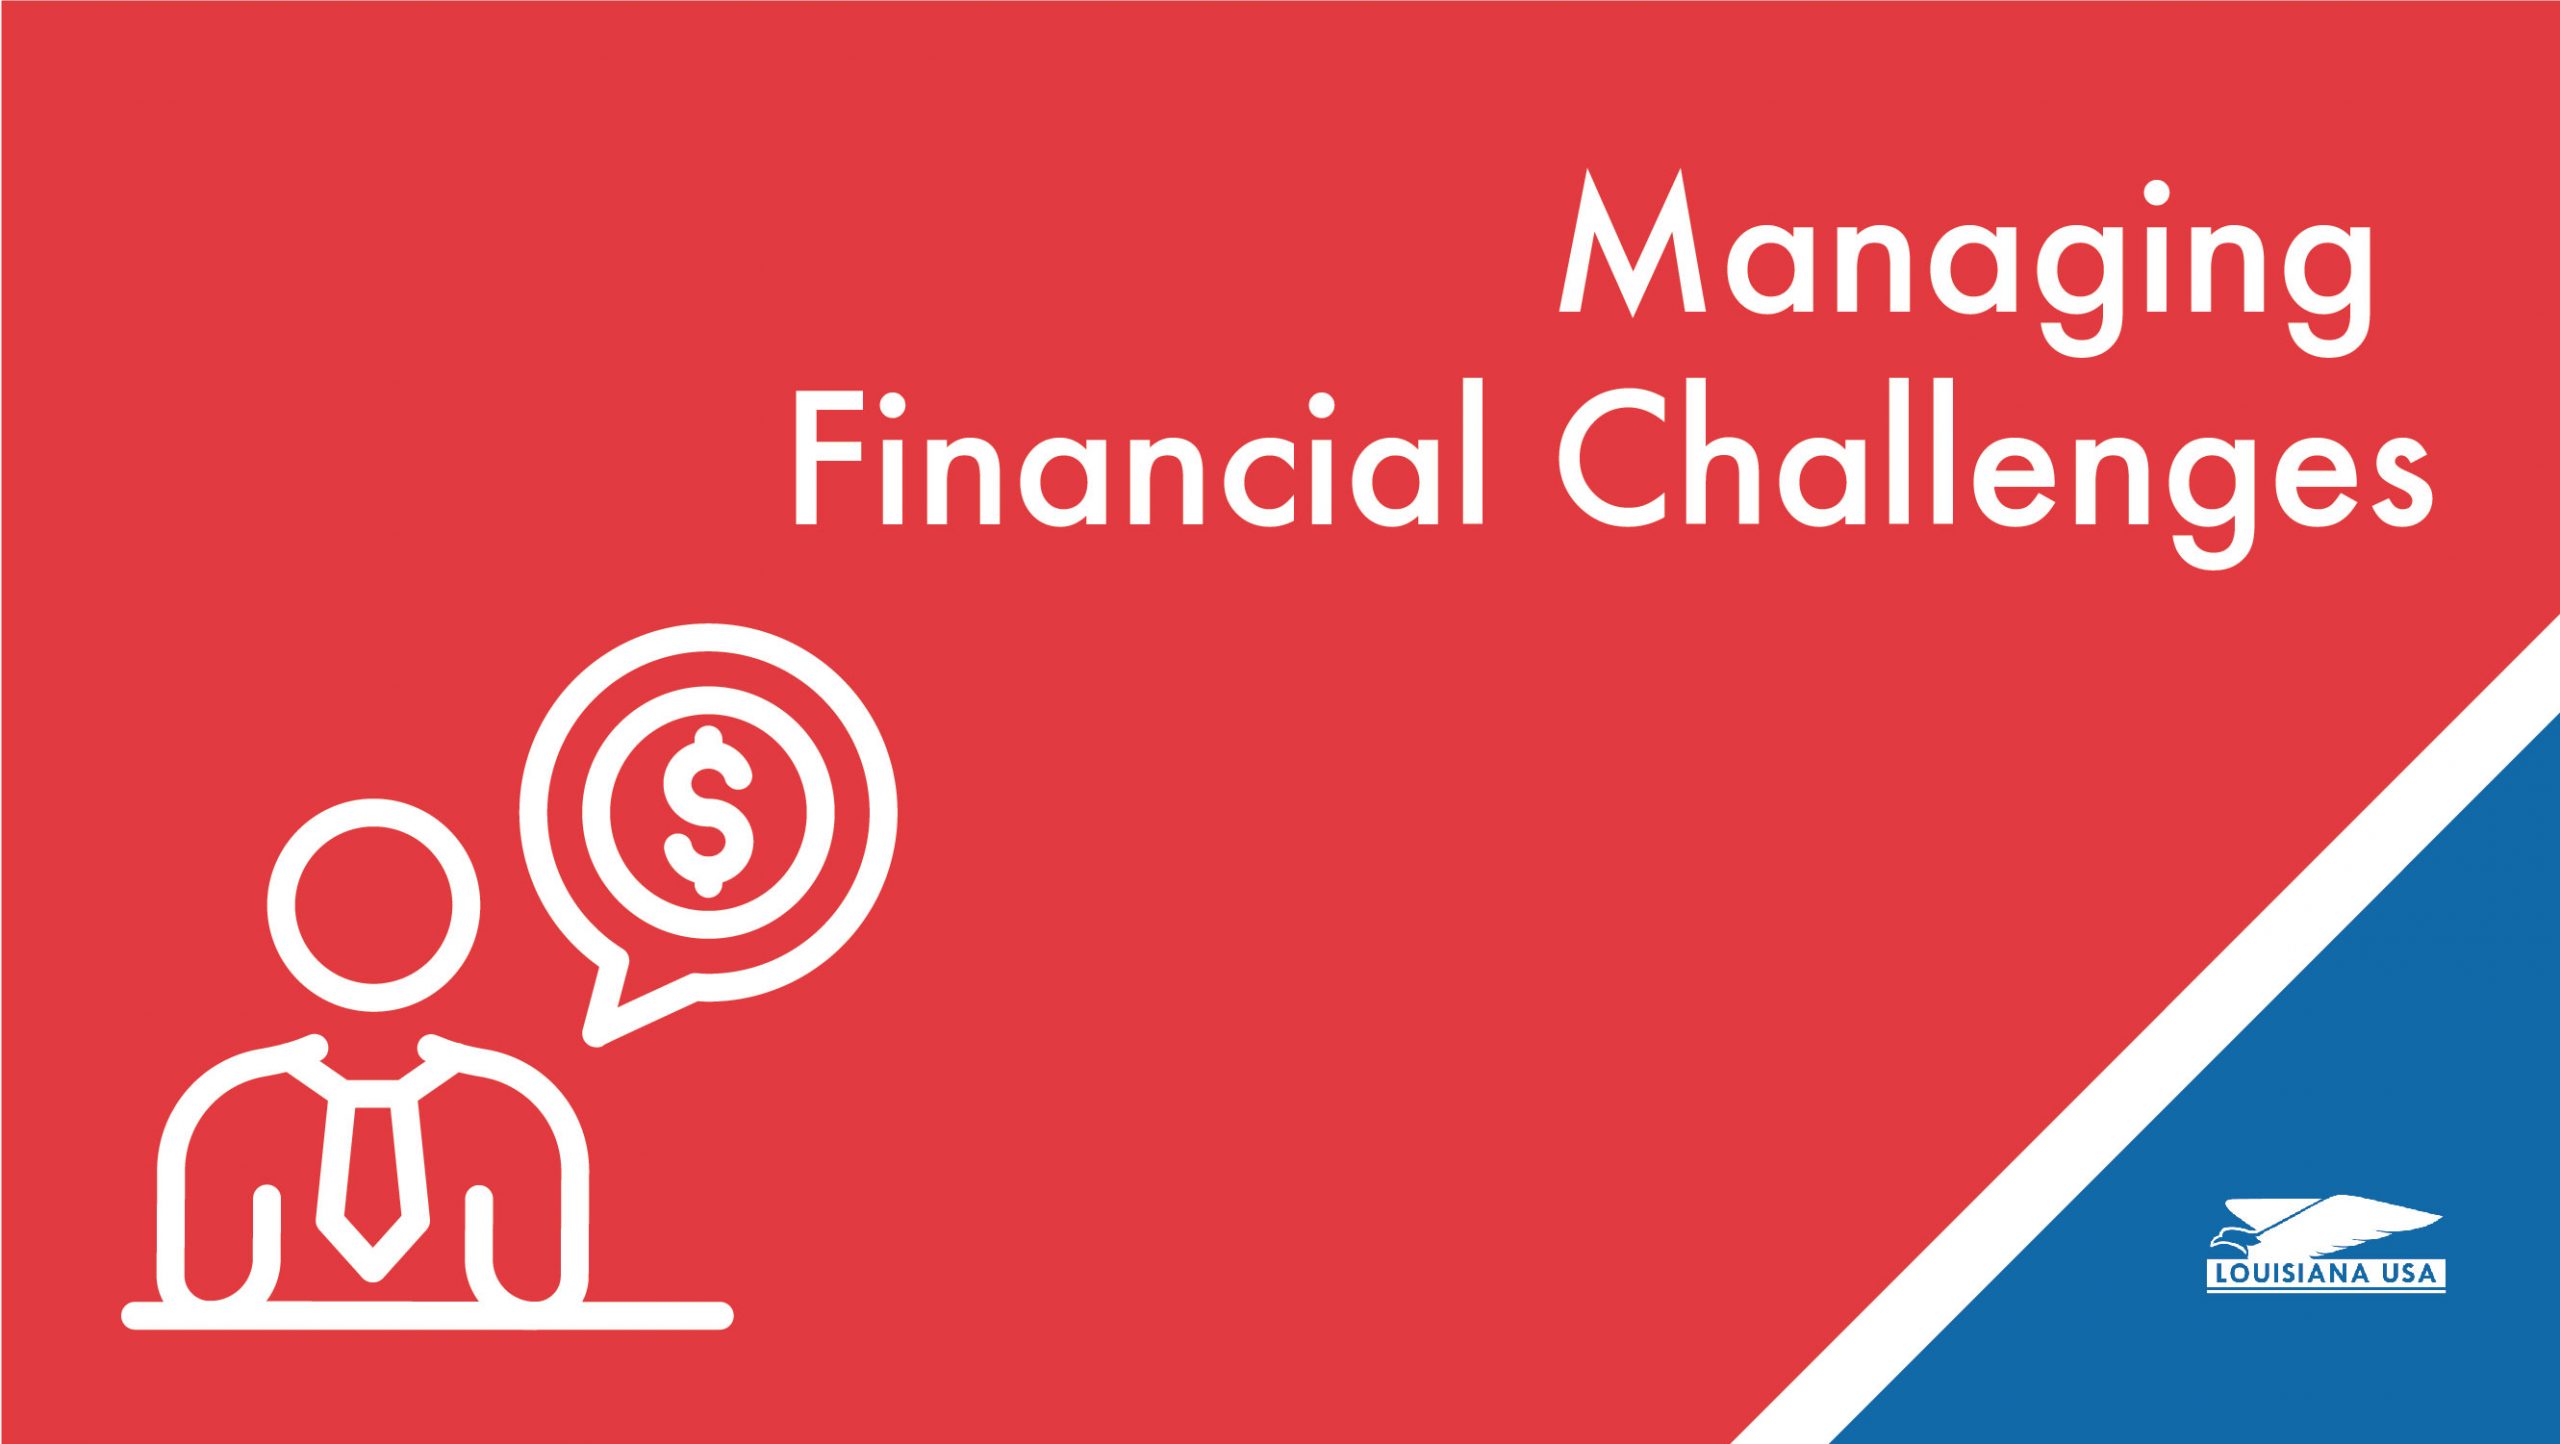 Managing Financial Challenges